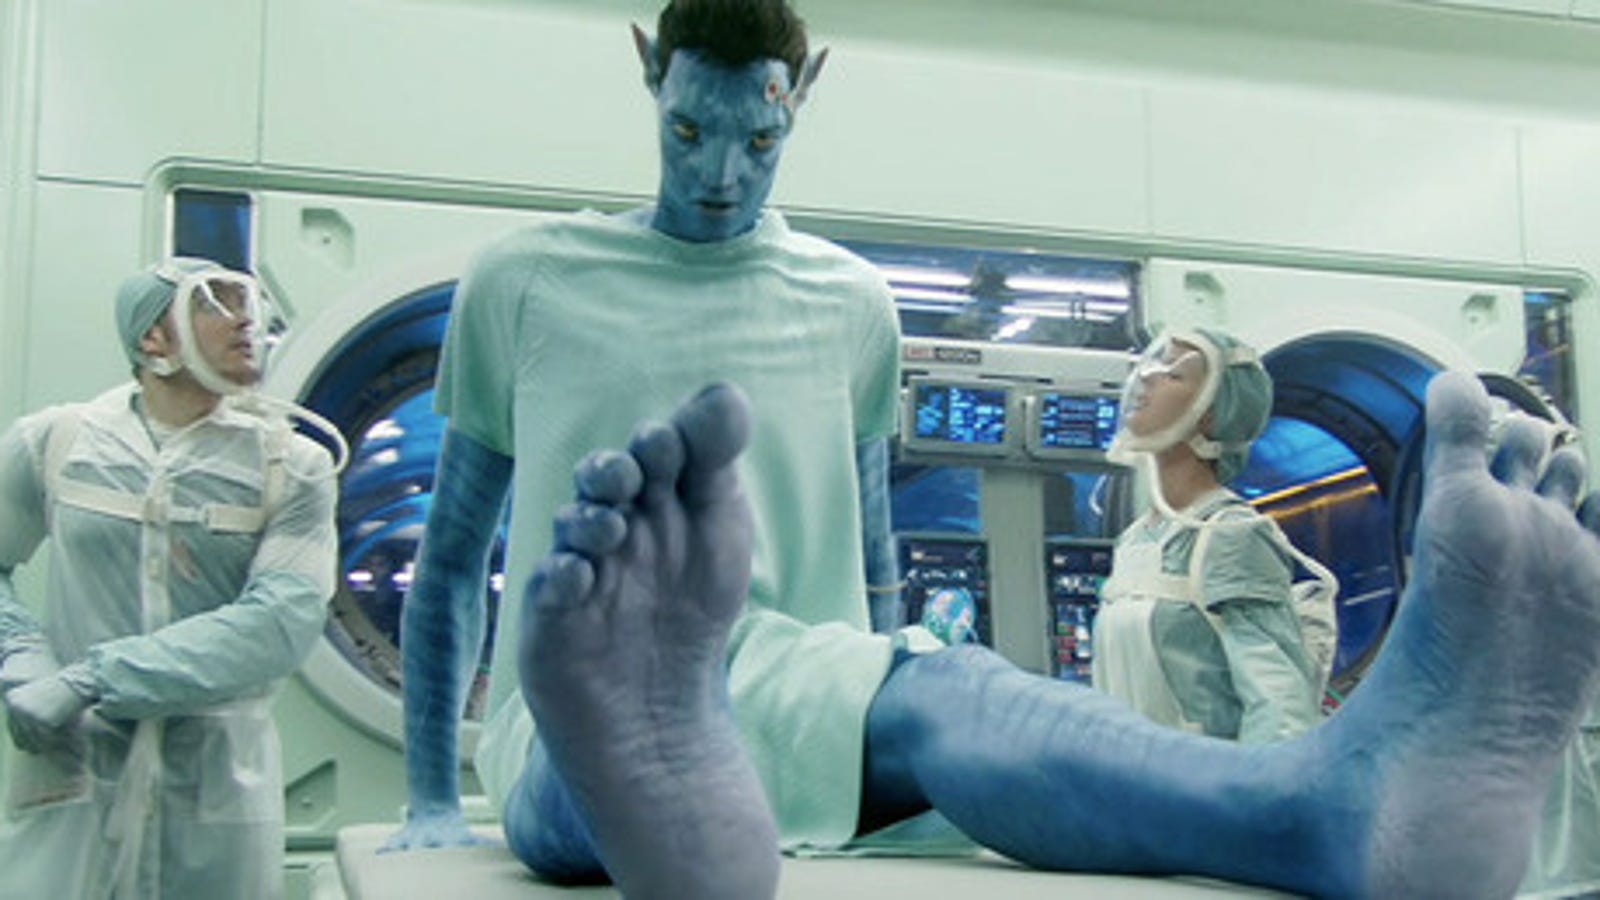 Avatar Does Well At Its Box Office Opening Weekend, With $232.2m in Sales